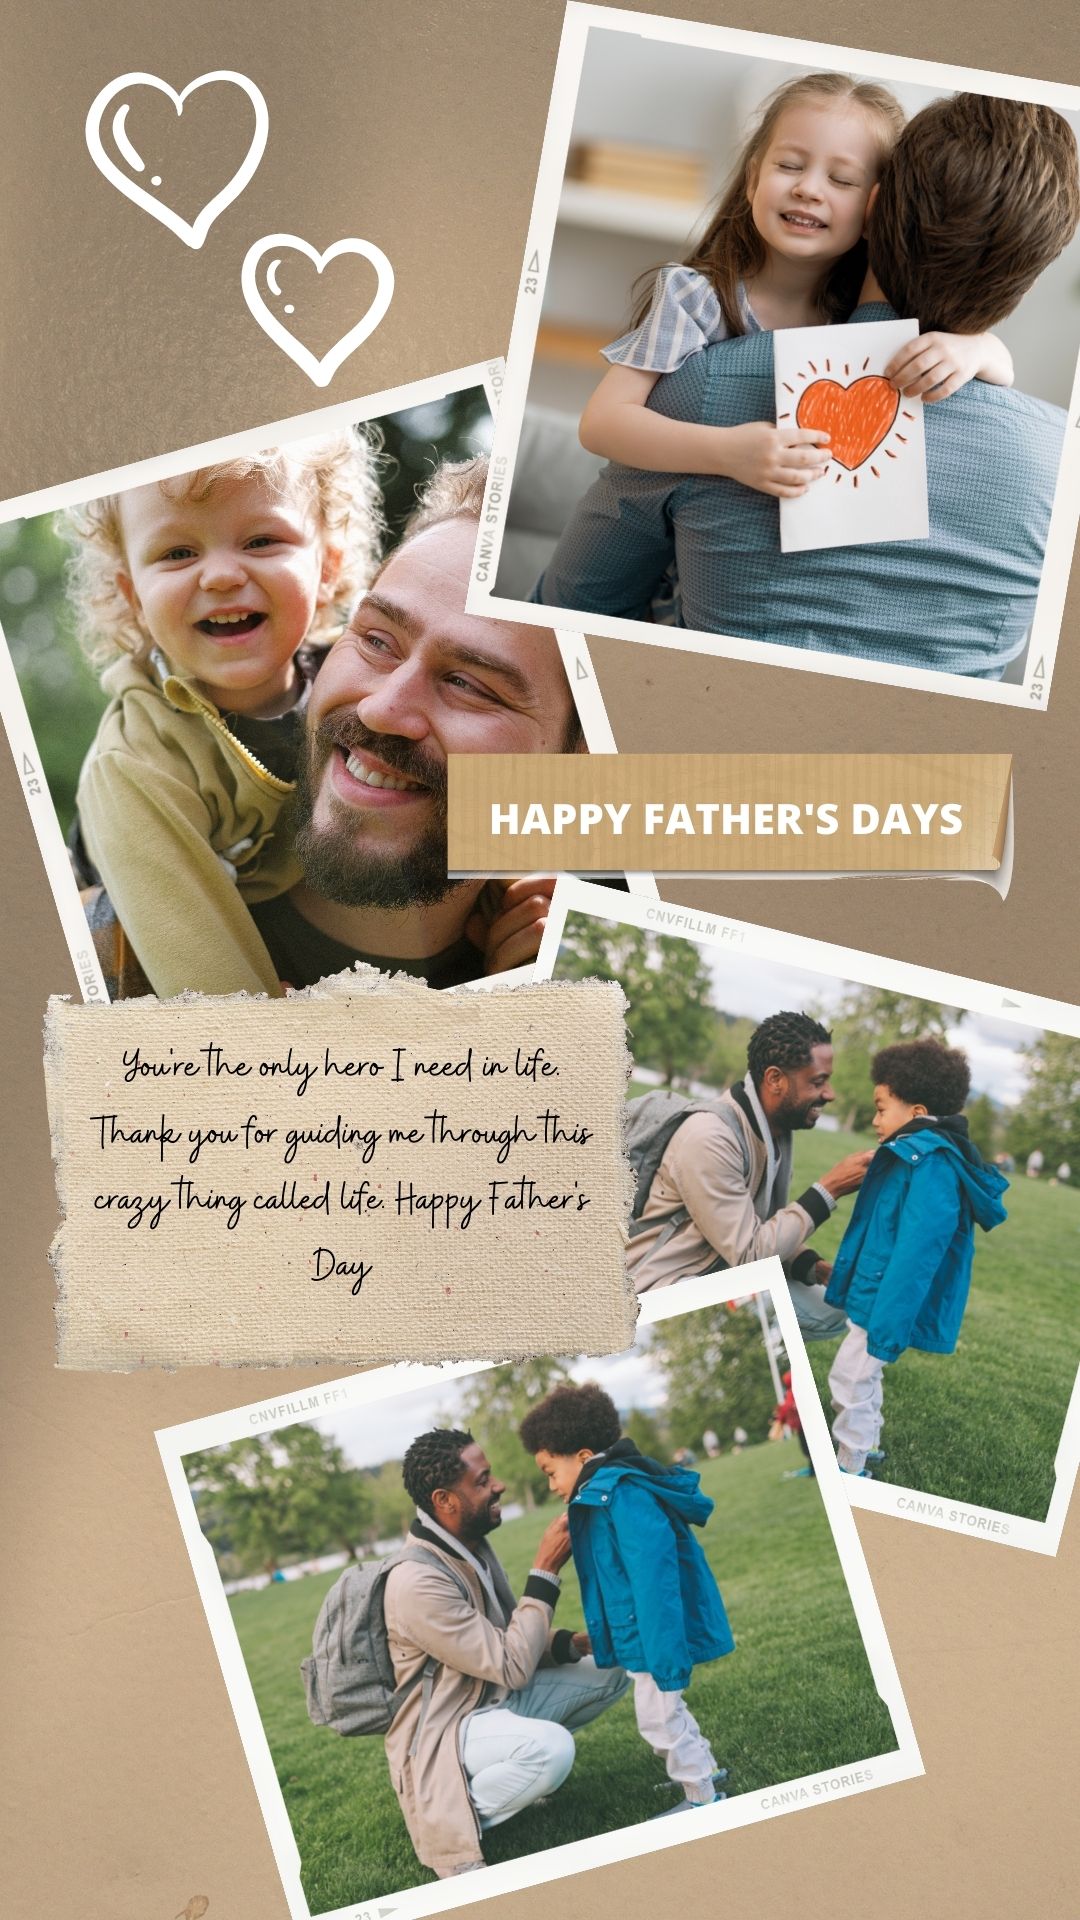 best happy father's day wishes images for instagram story (8)